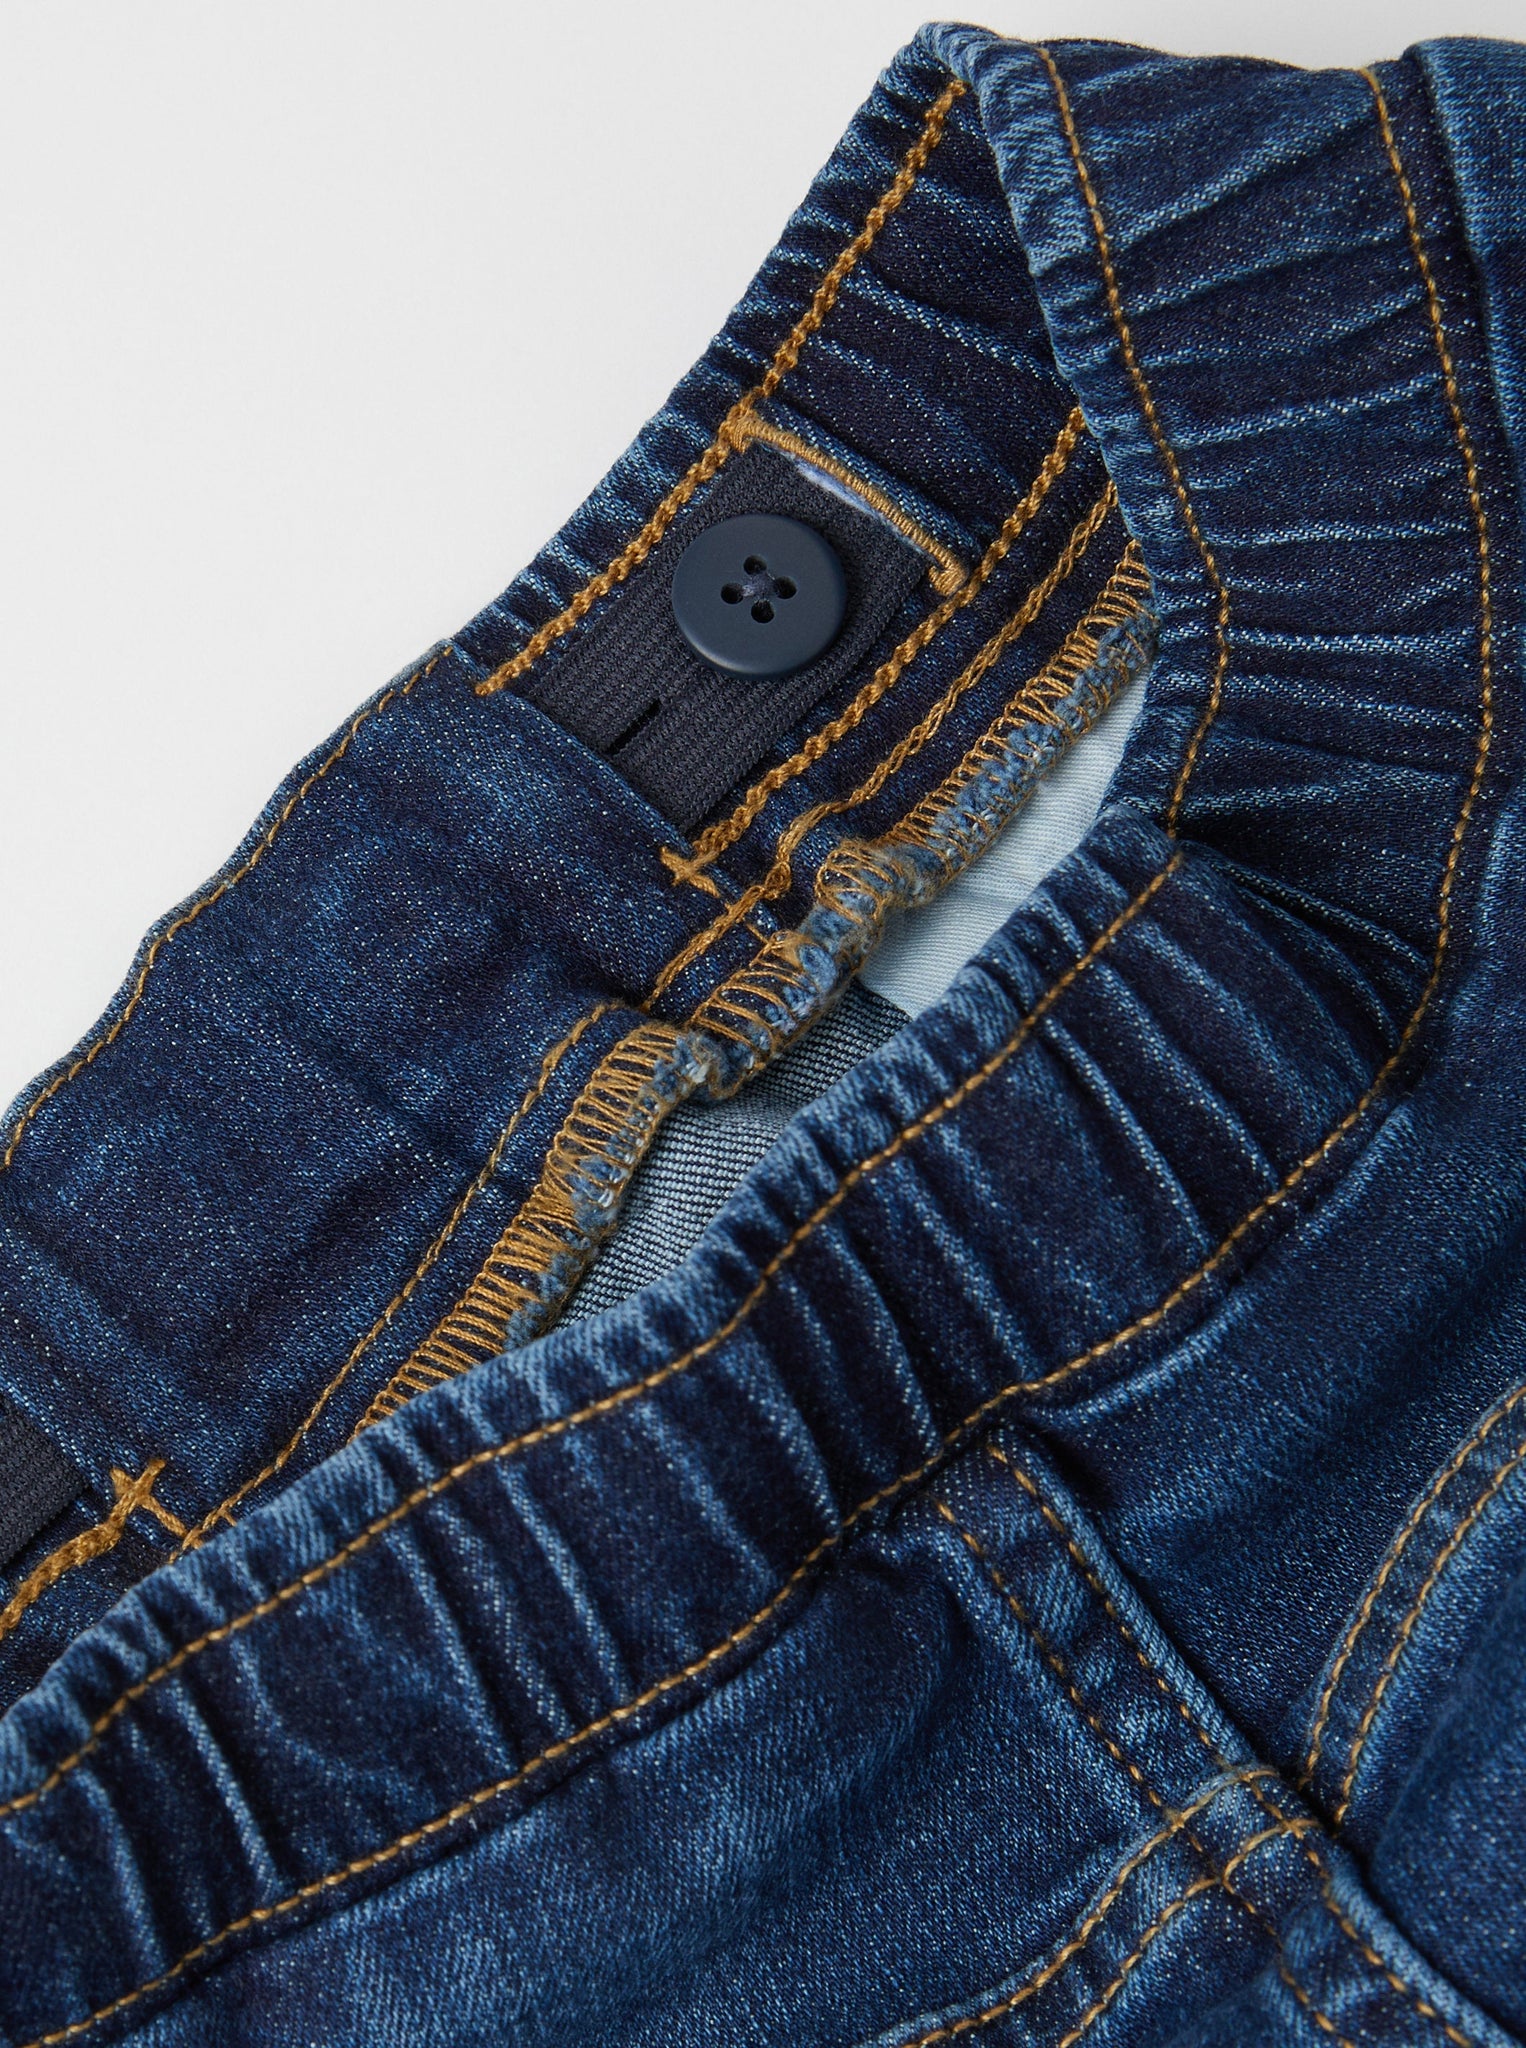 Organic Cotton Regular Fit Kids Jeans from the Polarn O. Pyret kidswear collection. The best ethical kids clothes